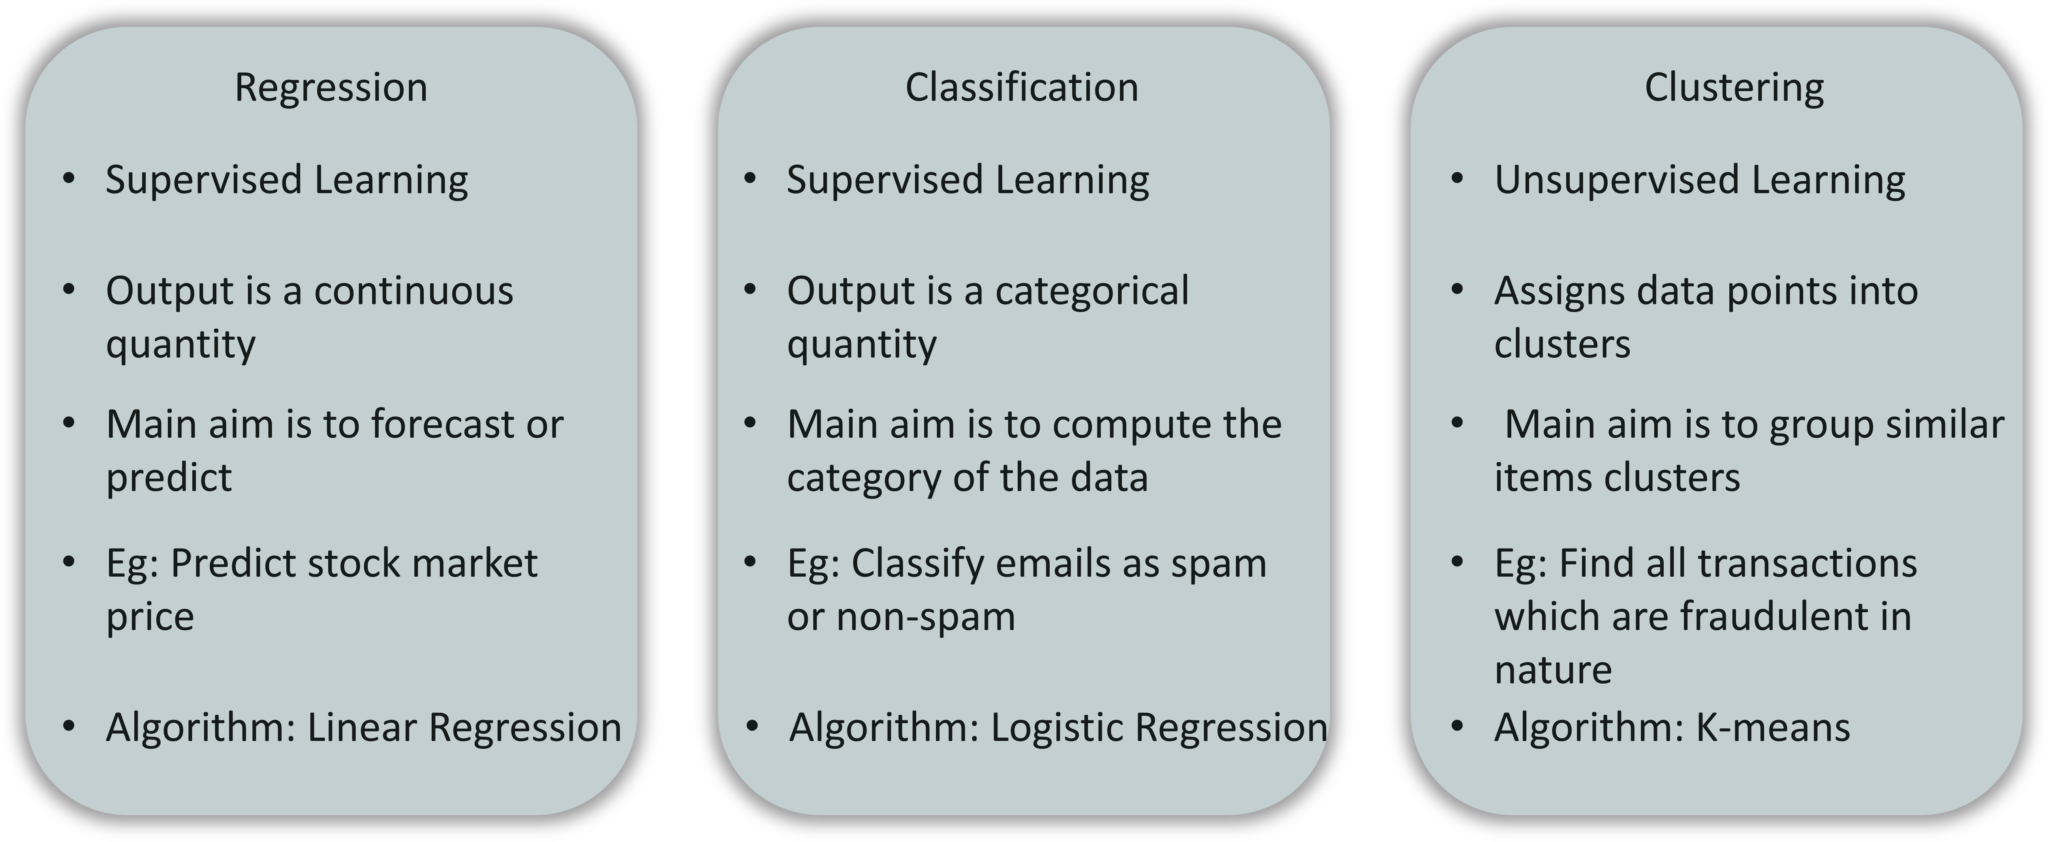 Regression vs Classification vs Clustering - Introduction To Machine Learning - Edureka